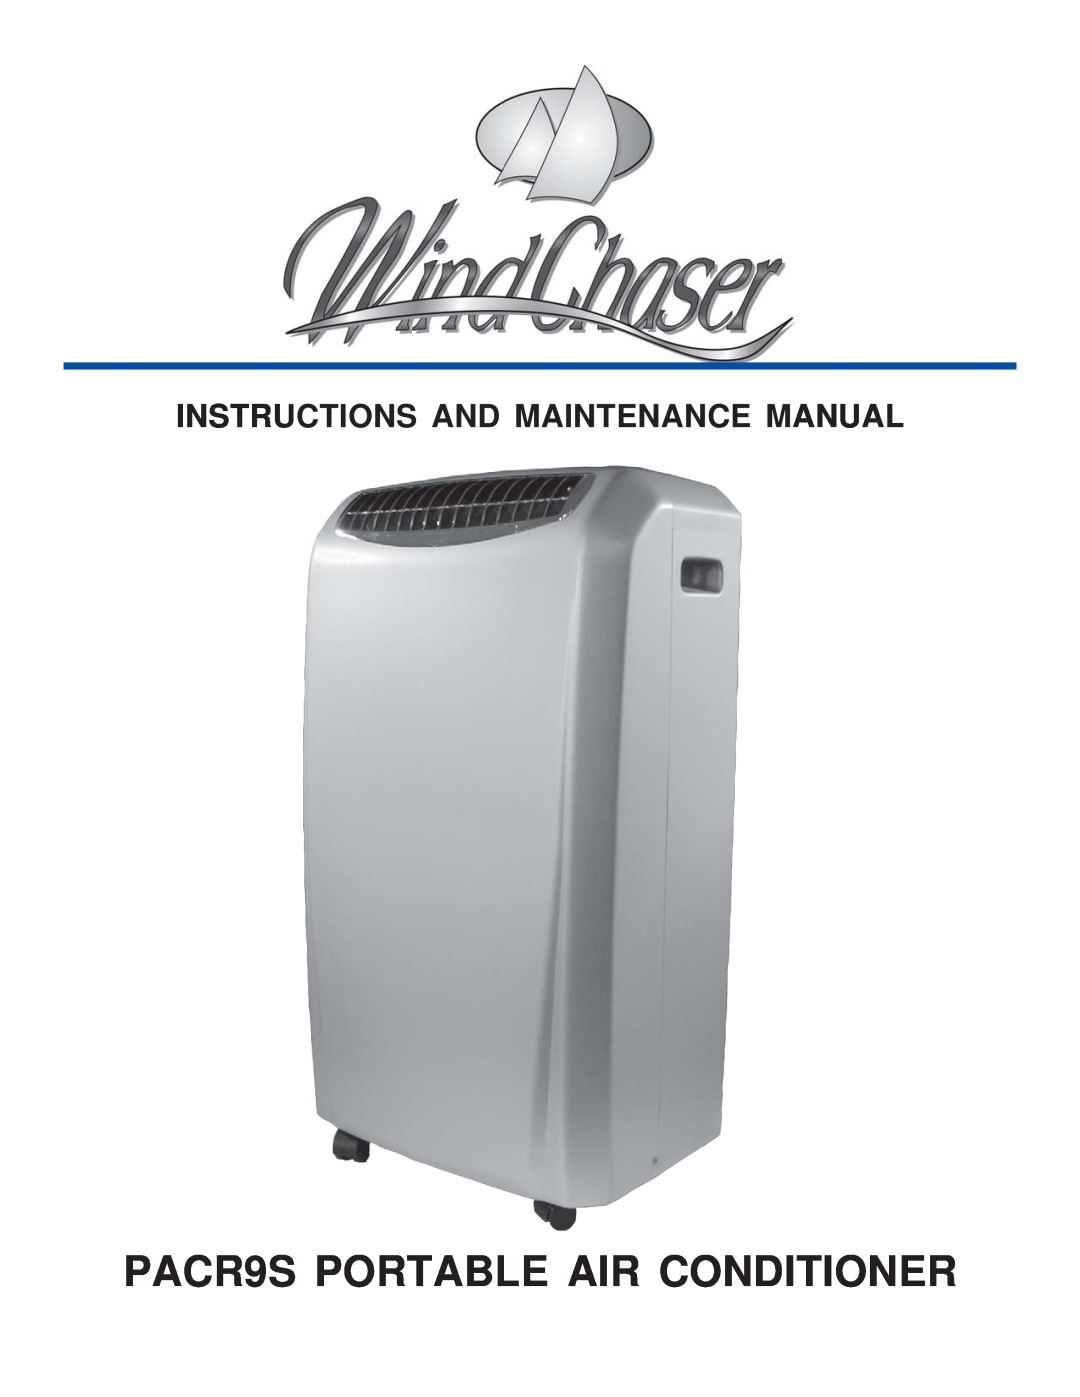 WindChaser Products manual Instructions And Maintenance Manual, PACR9S PORTABLE AIR CONDITIONER 